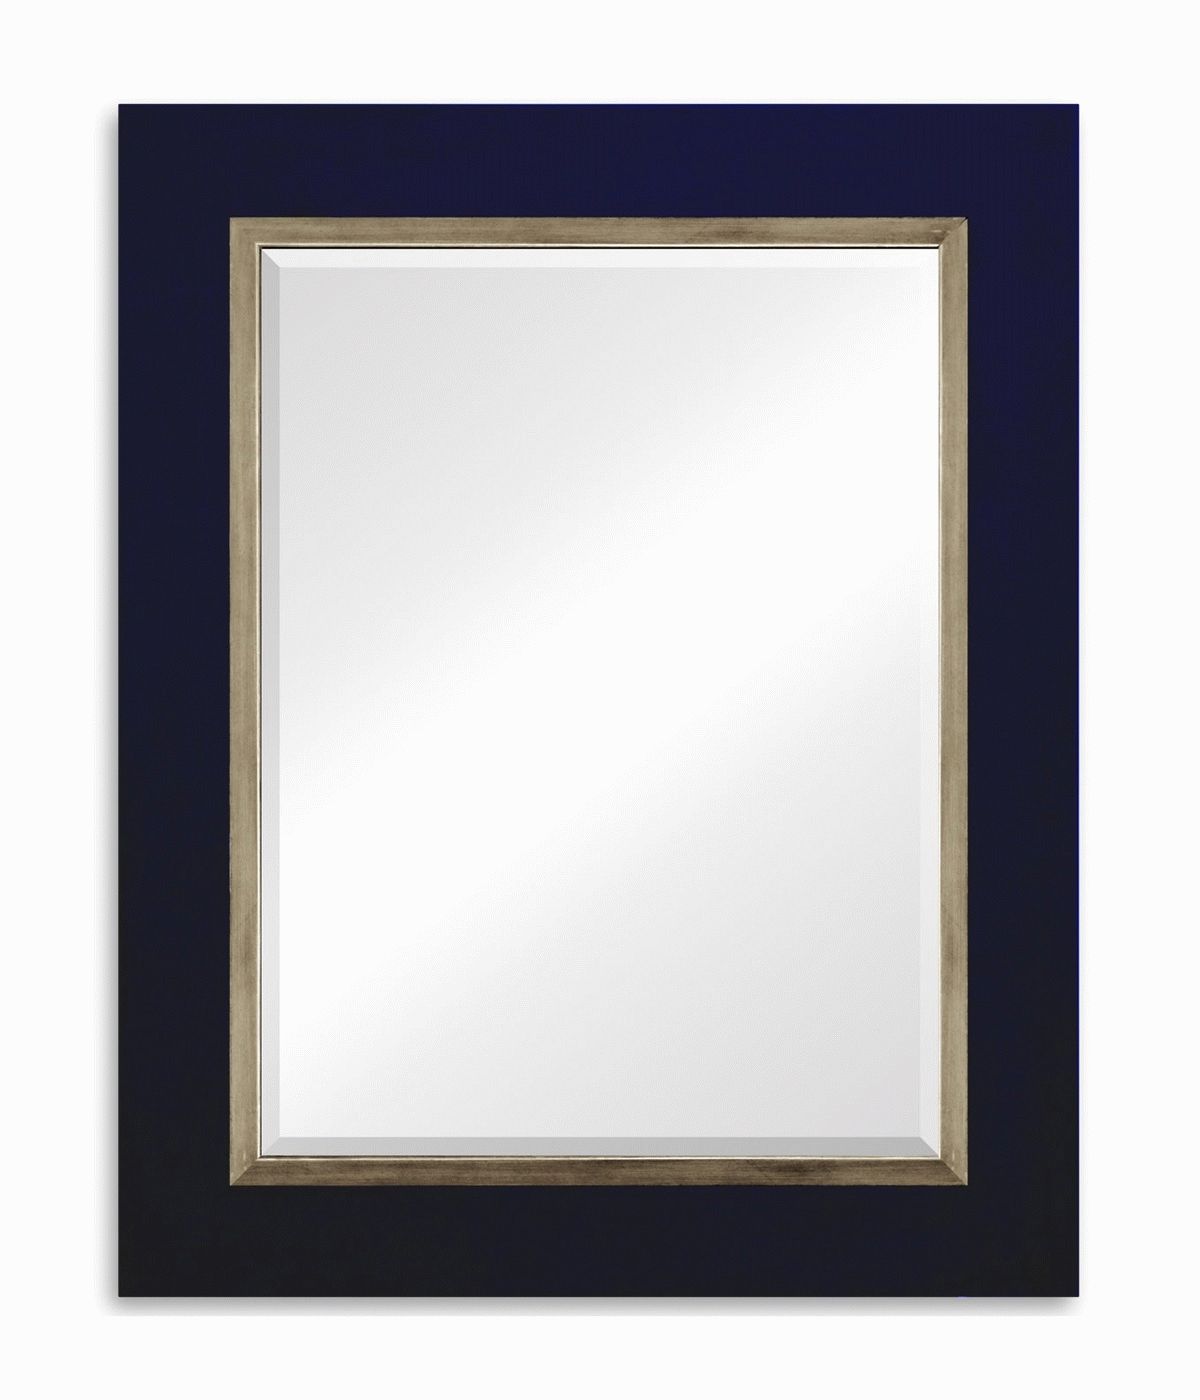 Navy Blue Wall Mirror, Navy Blue Wall Mirrors, Navy Blue Living In Mirrors With Blue Frame (View 4 of 25)